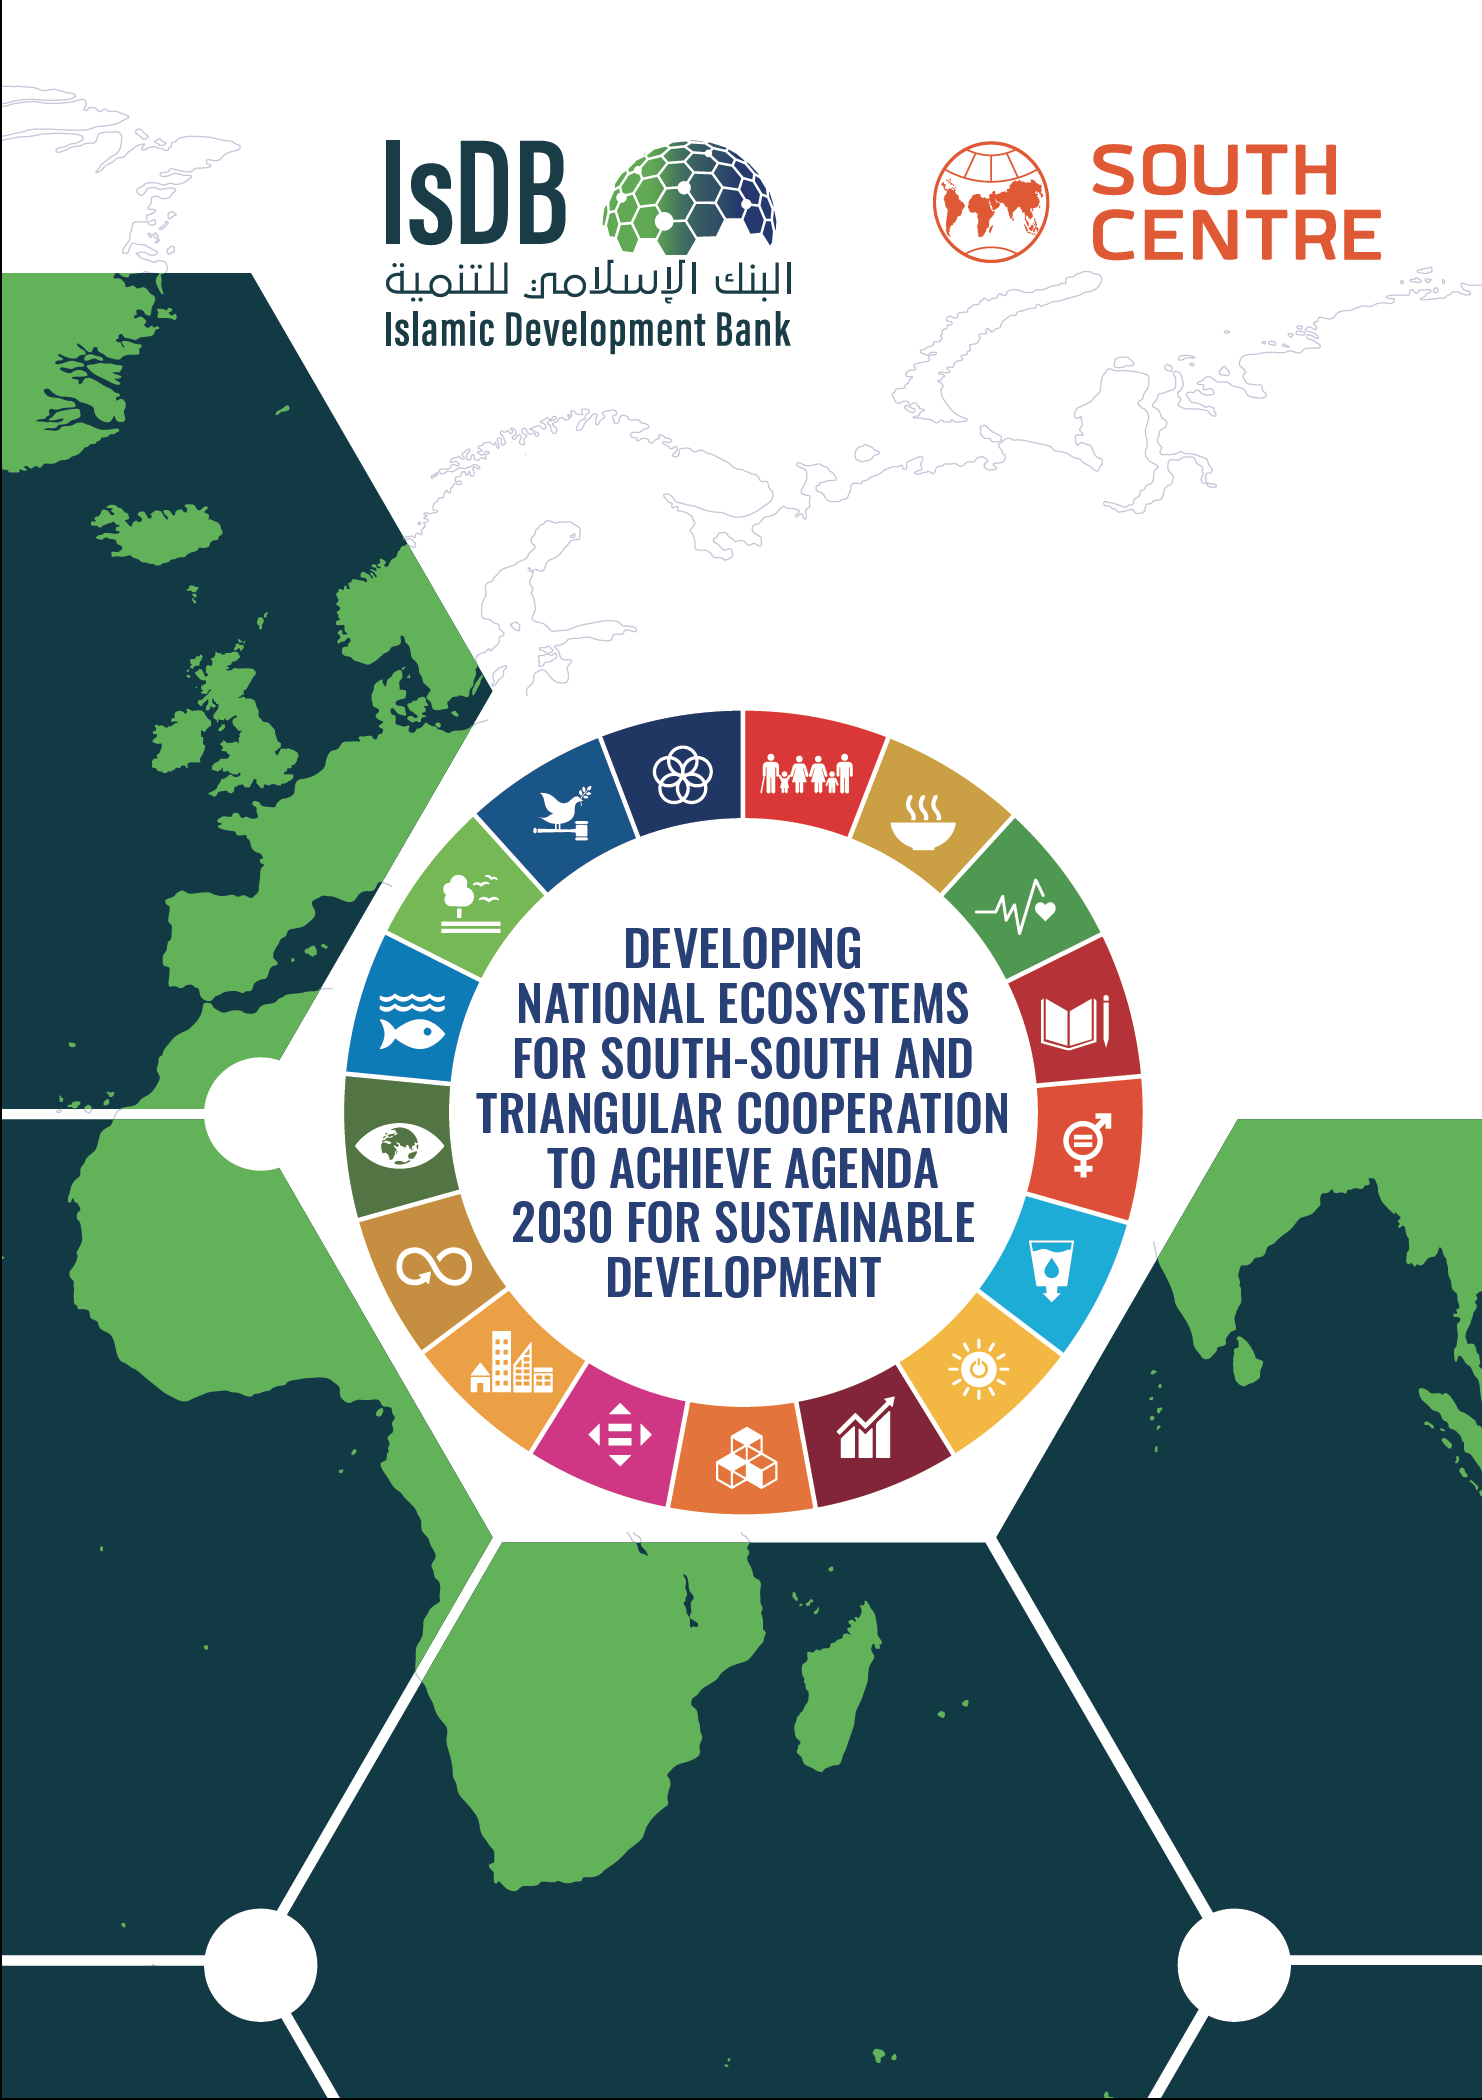 DEVELOPING NATIONAL ECOSYSTEMS FOR SStRC TO ACHIEVE 2030 AGENDA